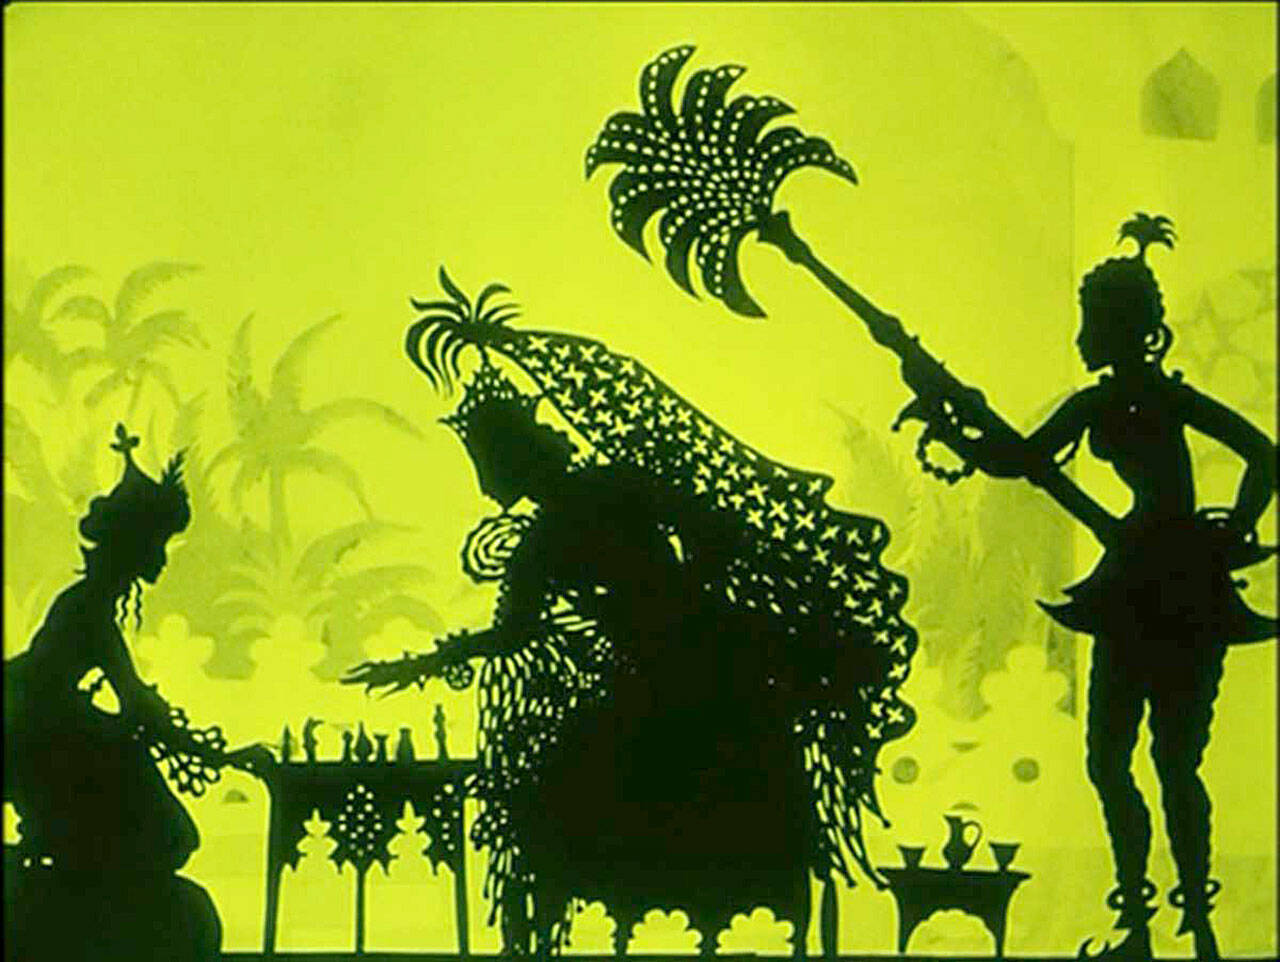 (Courtesy Photo) A still from the 1922 animated film, “The Adventures of Prince Achmed,” shows the film’s almost mind-boggling artwork, told frame by frame in silhouettes cut by hand by the film’s director, Lotte Reiniger.